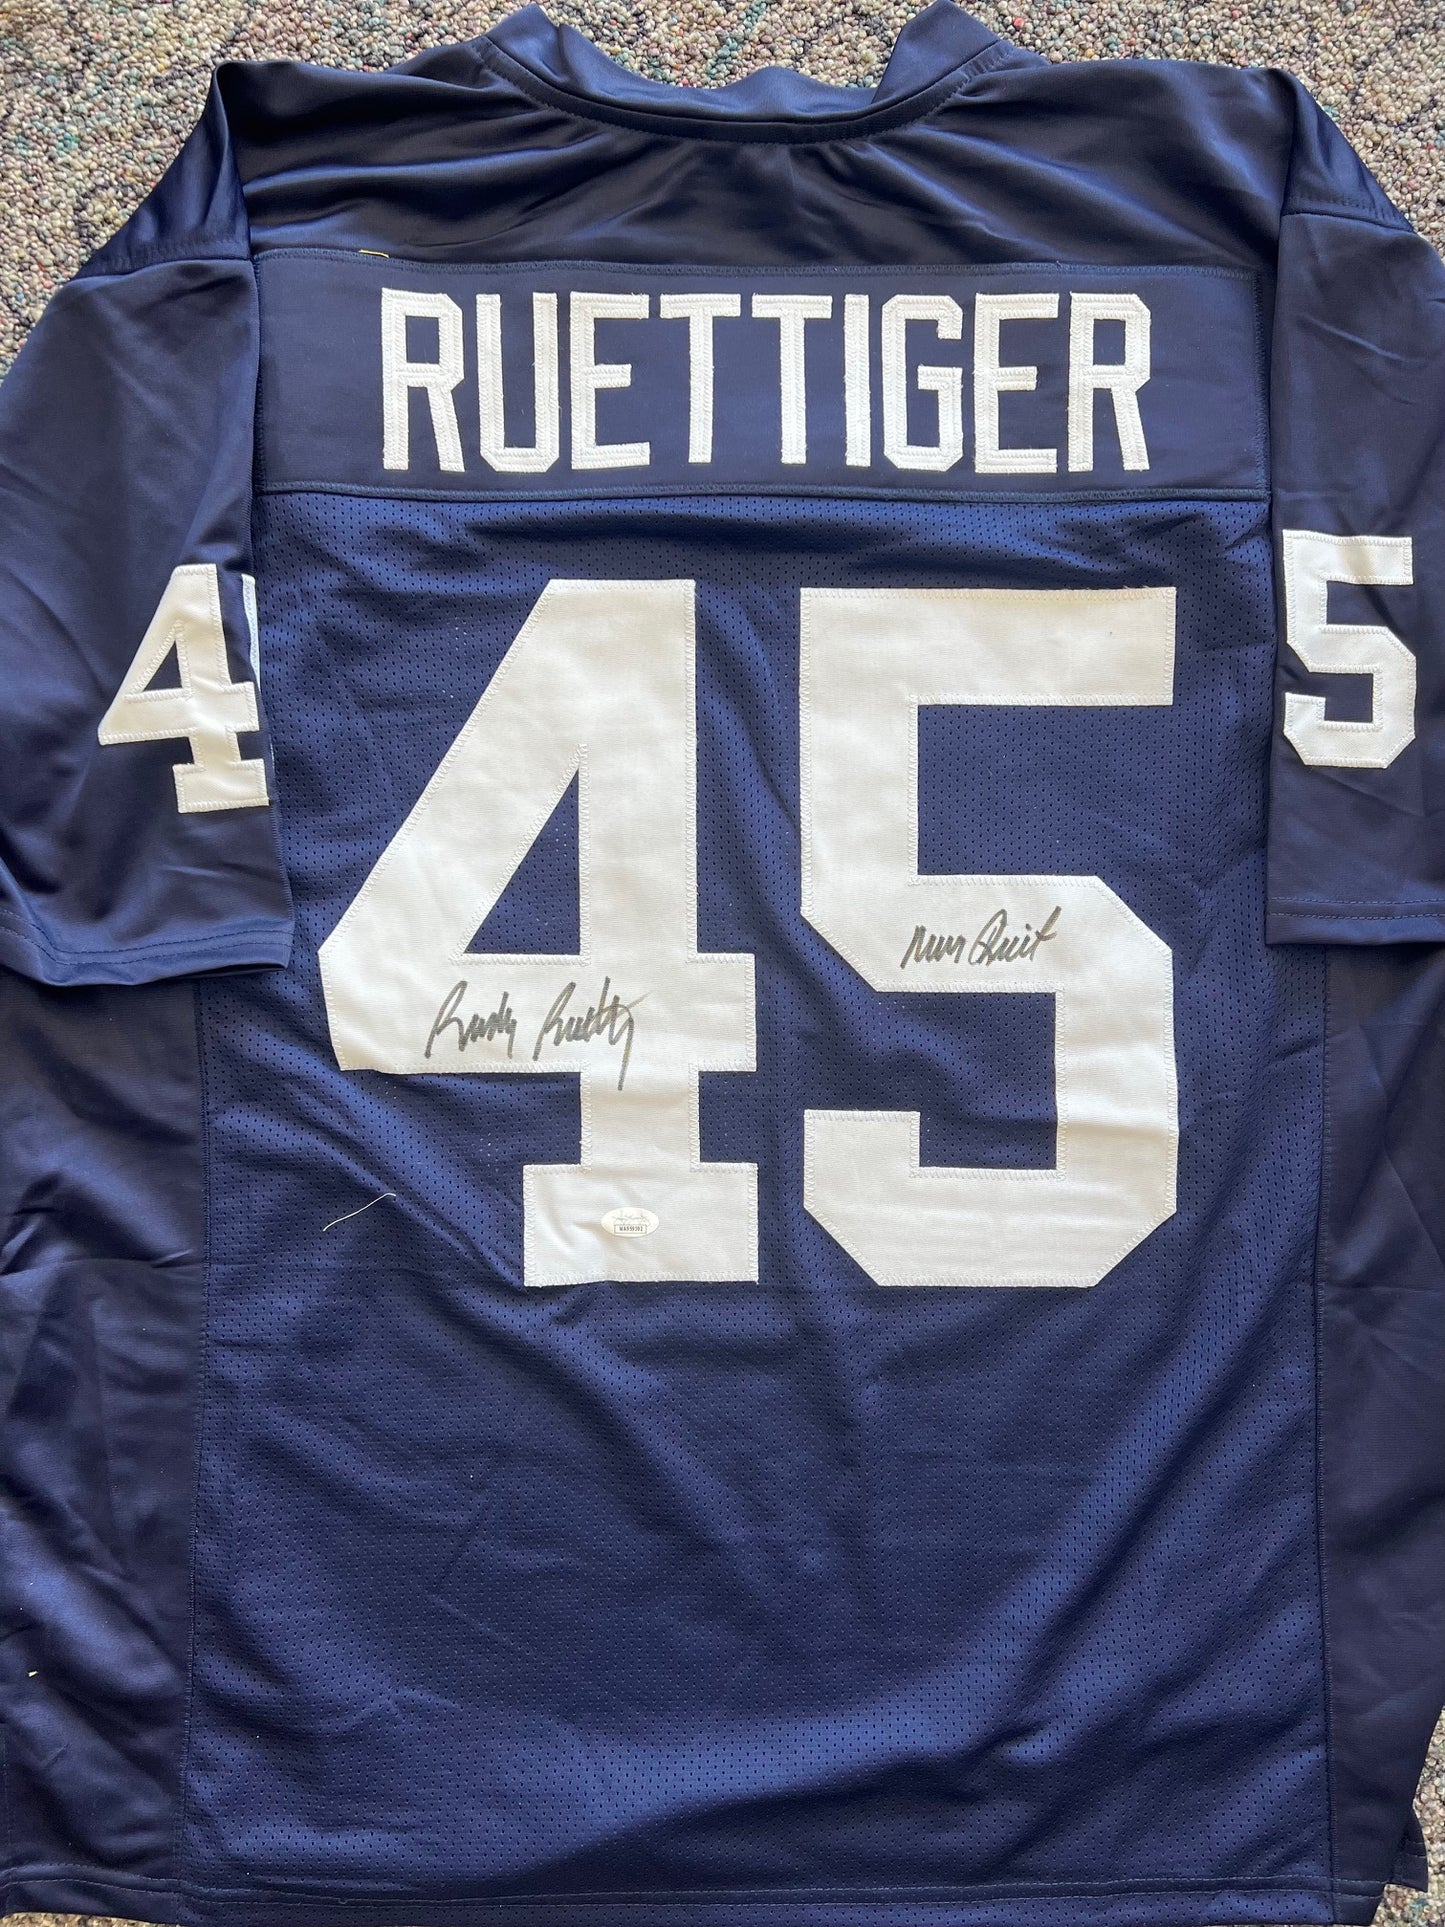 Notre Dame Rudy Ruettiger Signed/Inscribed Blue Jersey with JSA COA